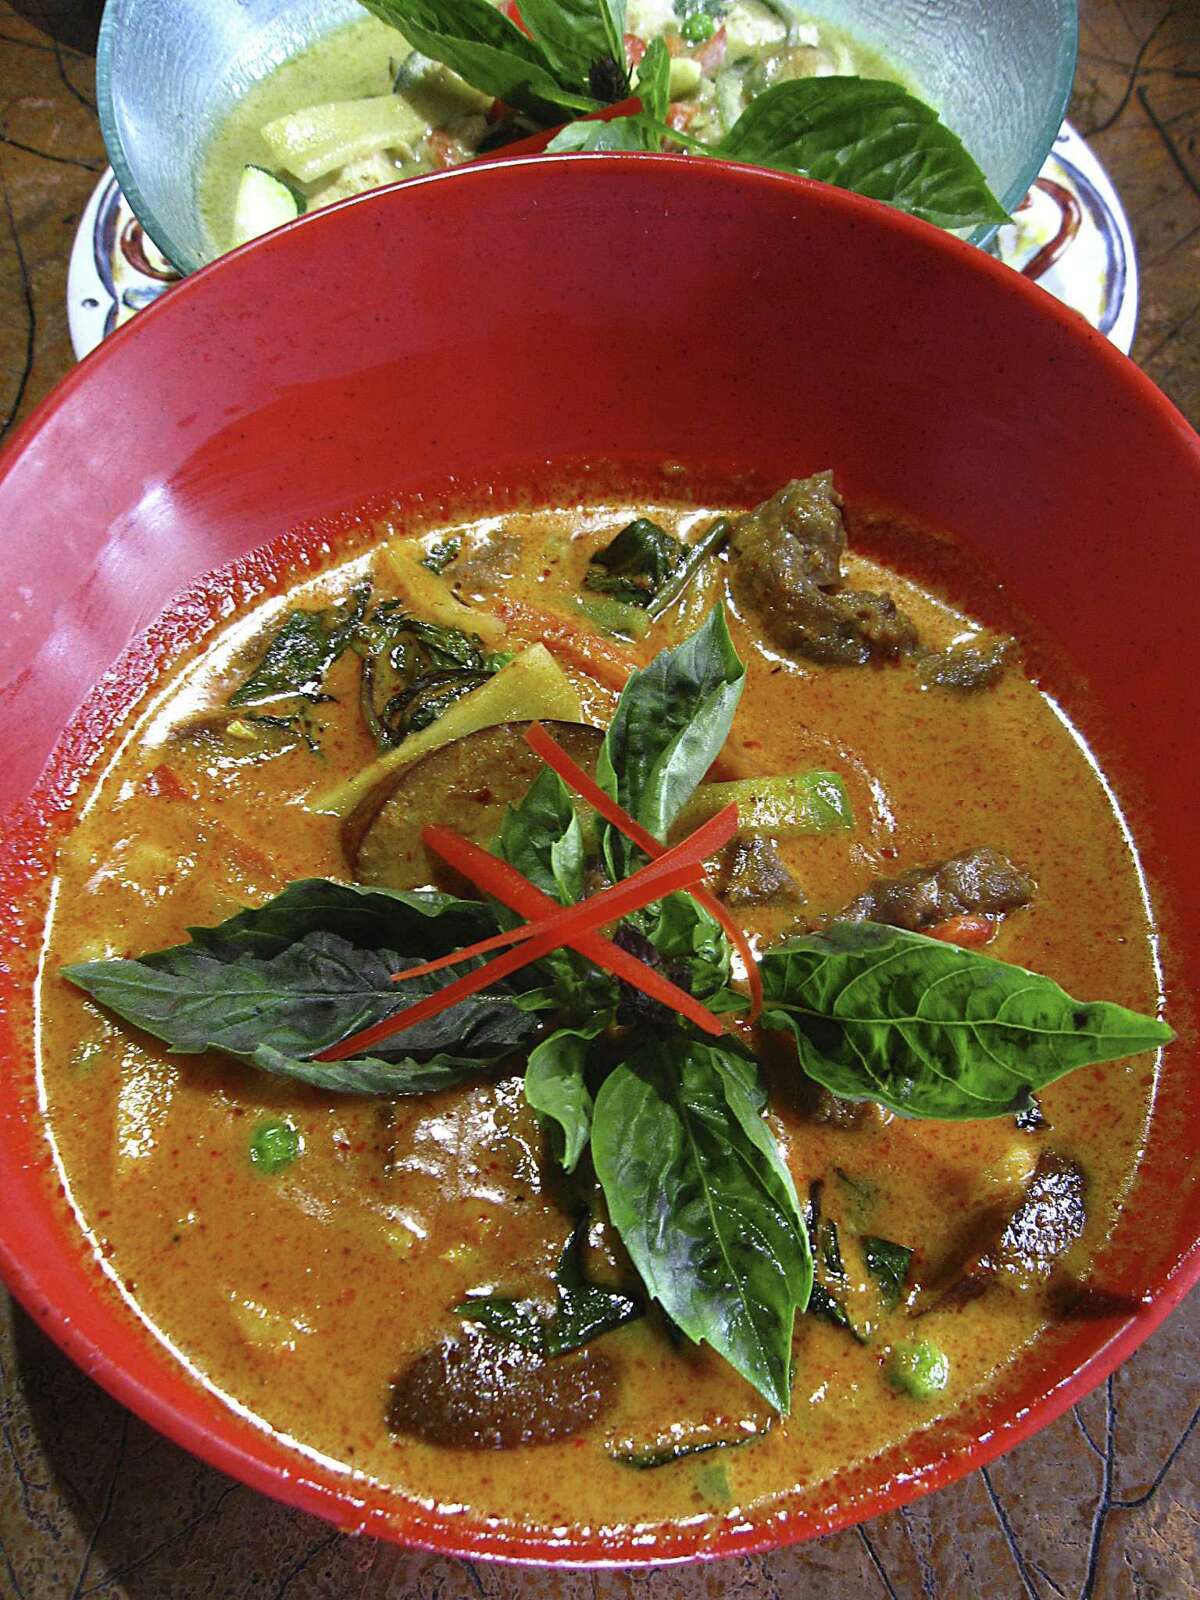 Curry options include gaeng ped red curry with beef and gaeng keow wan green curry with chicken at Tong's Thai Restaurant.